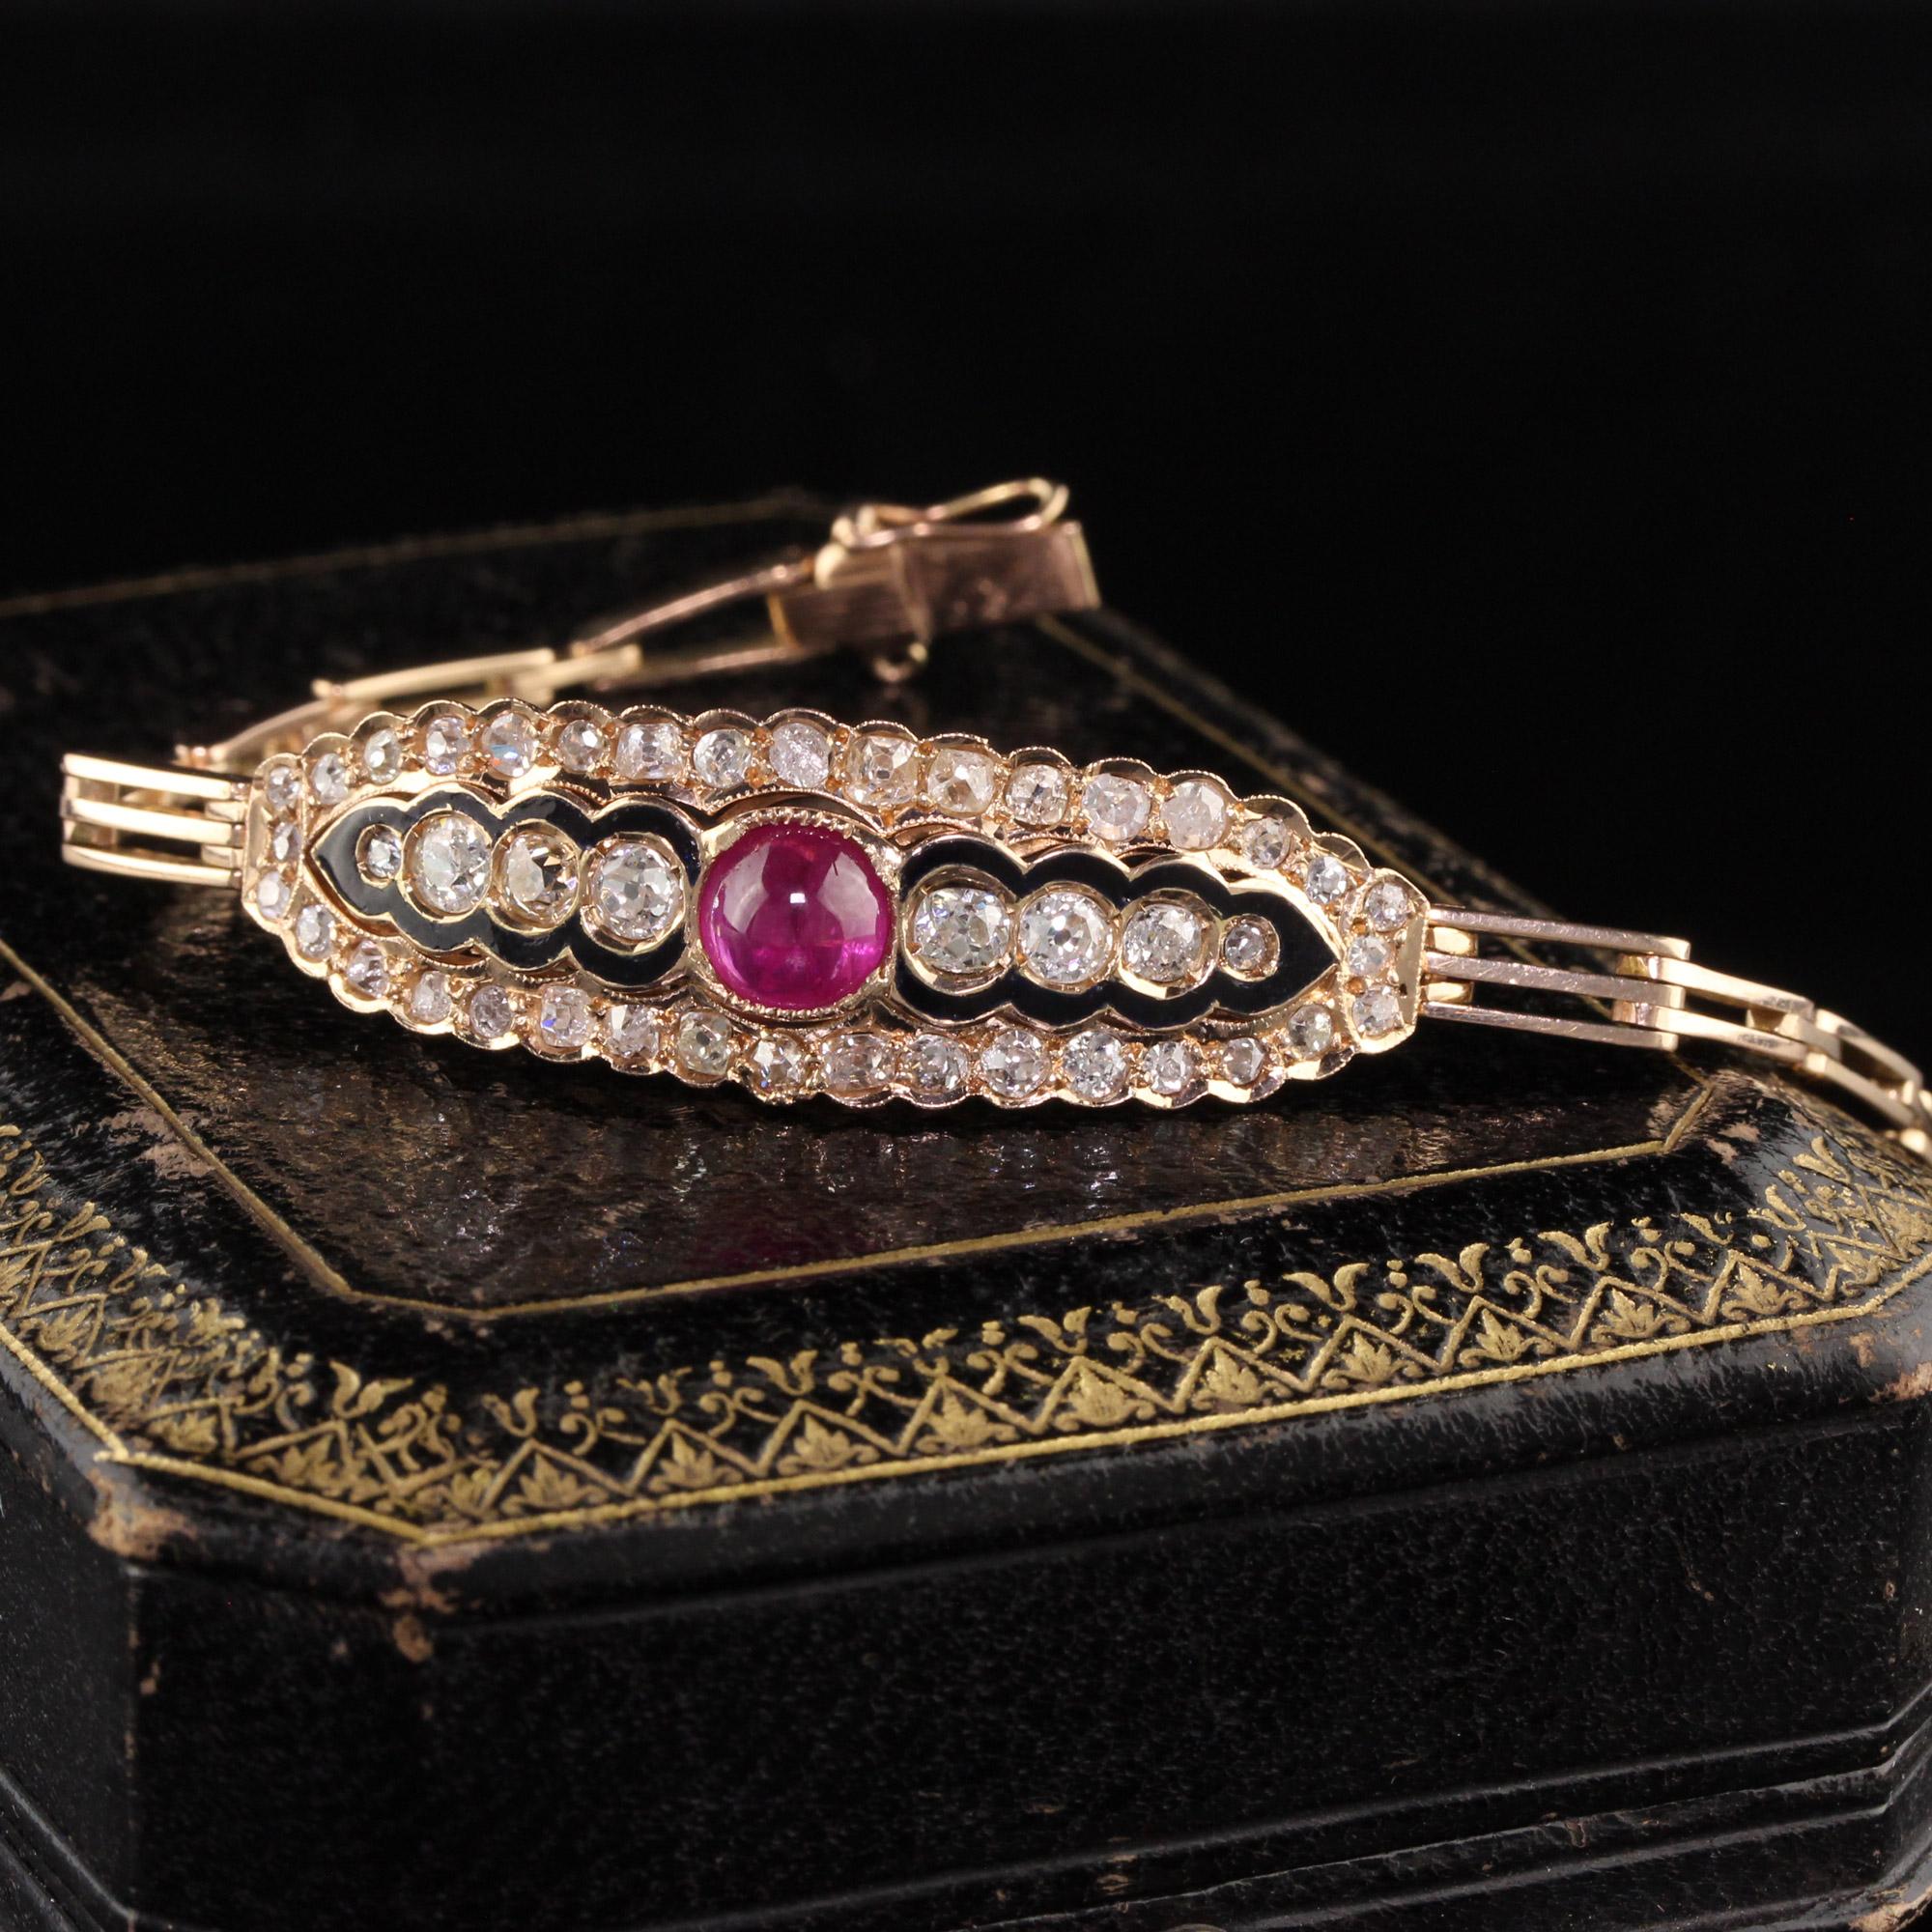 Beautiful Antique Victorian 14K Rose Gold Old Mine Diamond and Cabochon Ruby Bracelet. This gorgeous bracelet is crafted in 14k rose gold. The bracelet features old mine cut diamonds and a natural cabochon ruby set in a gorgeous enamel Victorian